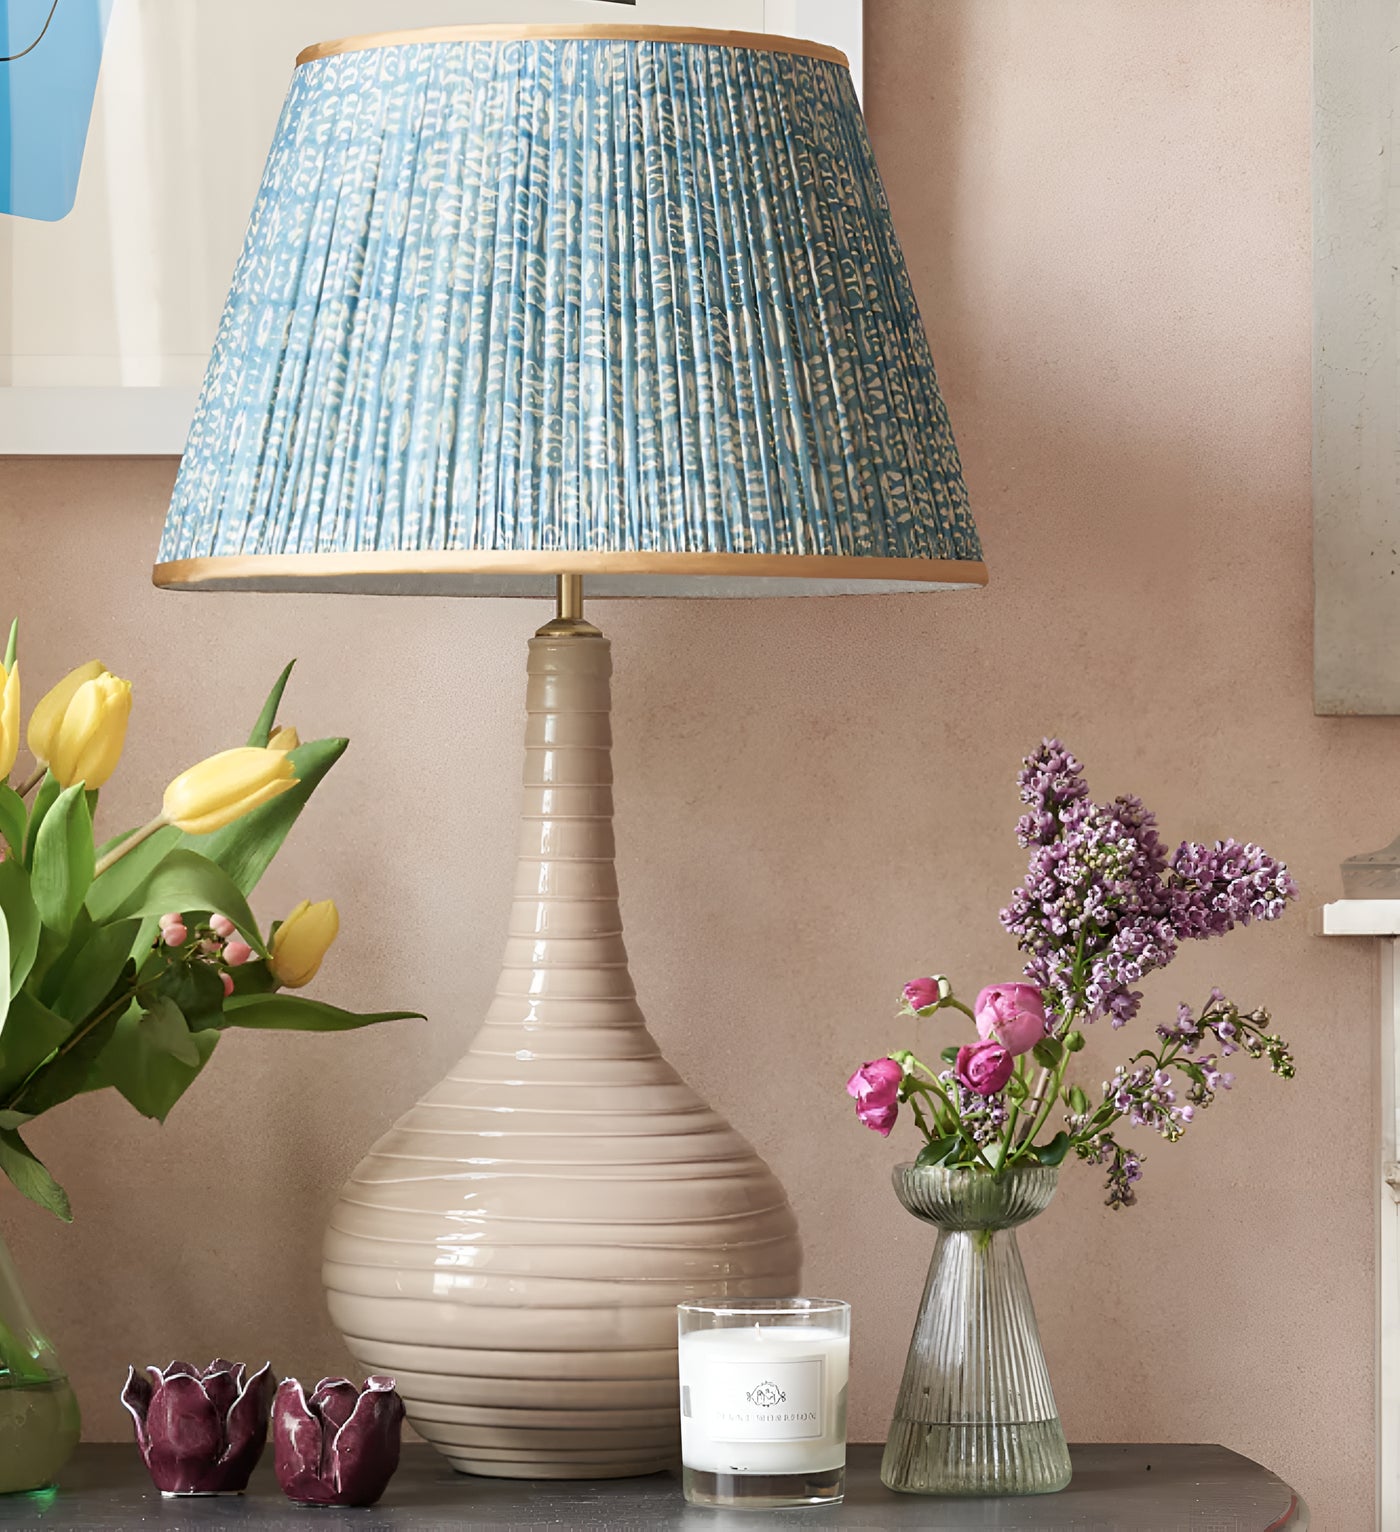 Biscuit Lamp and Penny Morrison Lampshade